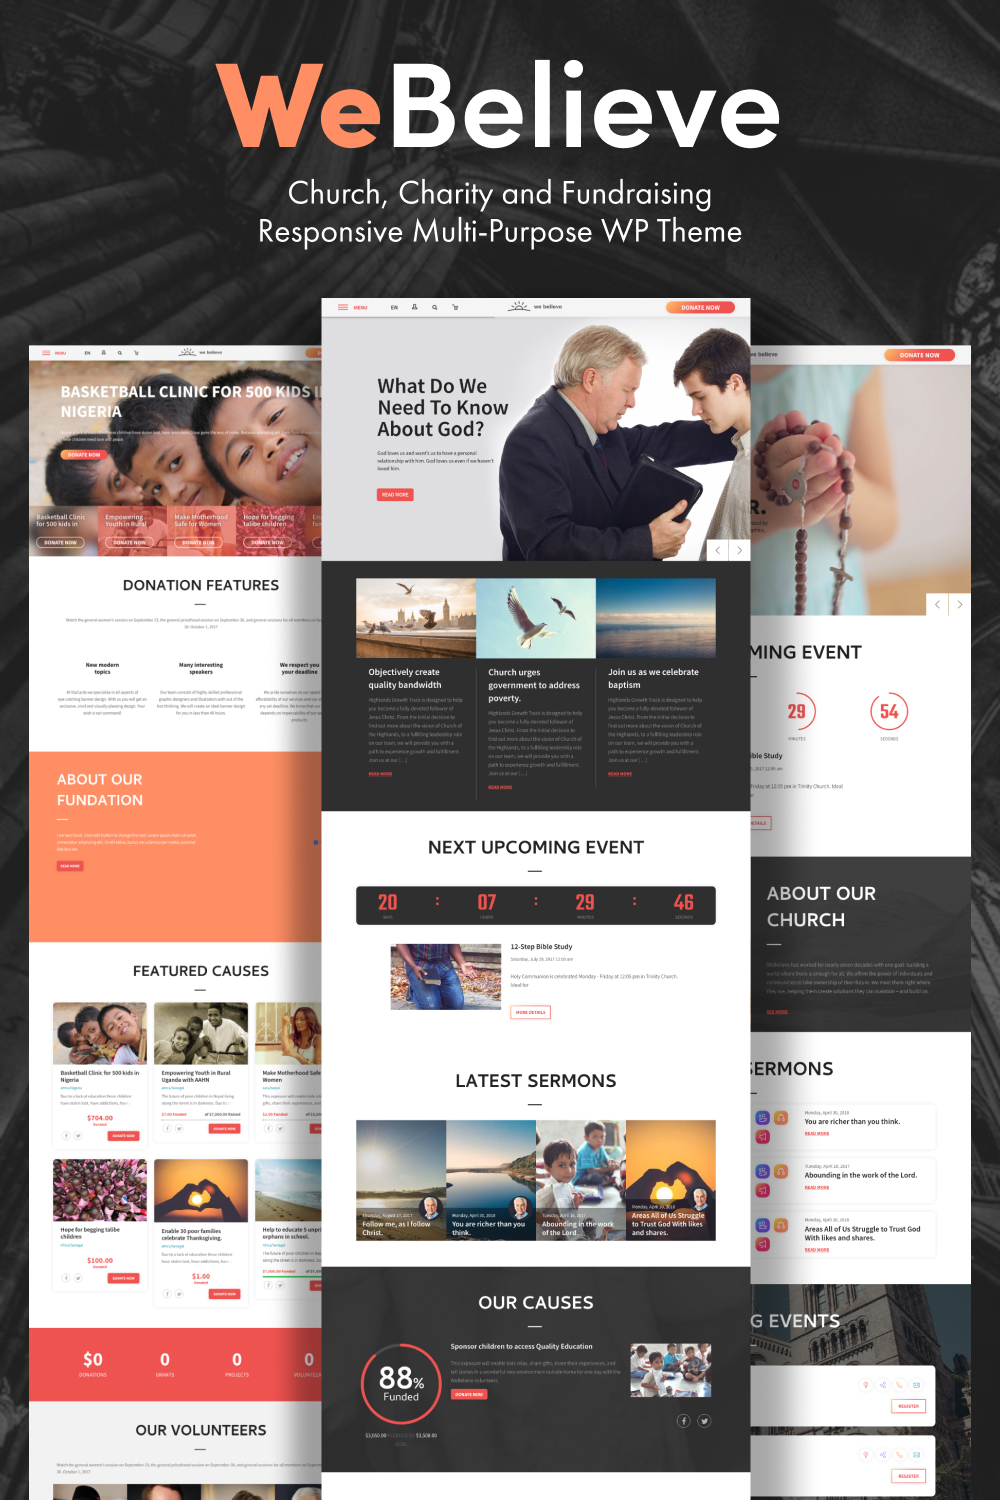 Pinterest of webelieve church charity and fundraising responsive multi purpose wp theme.